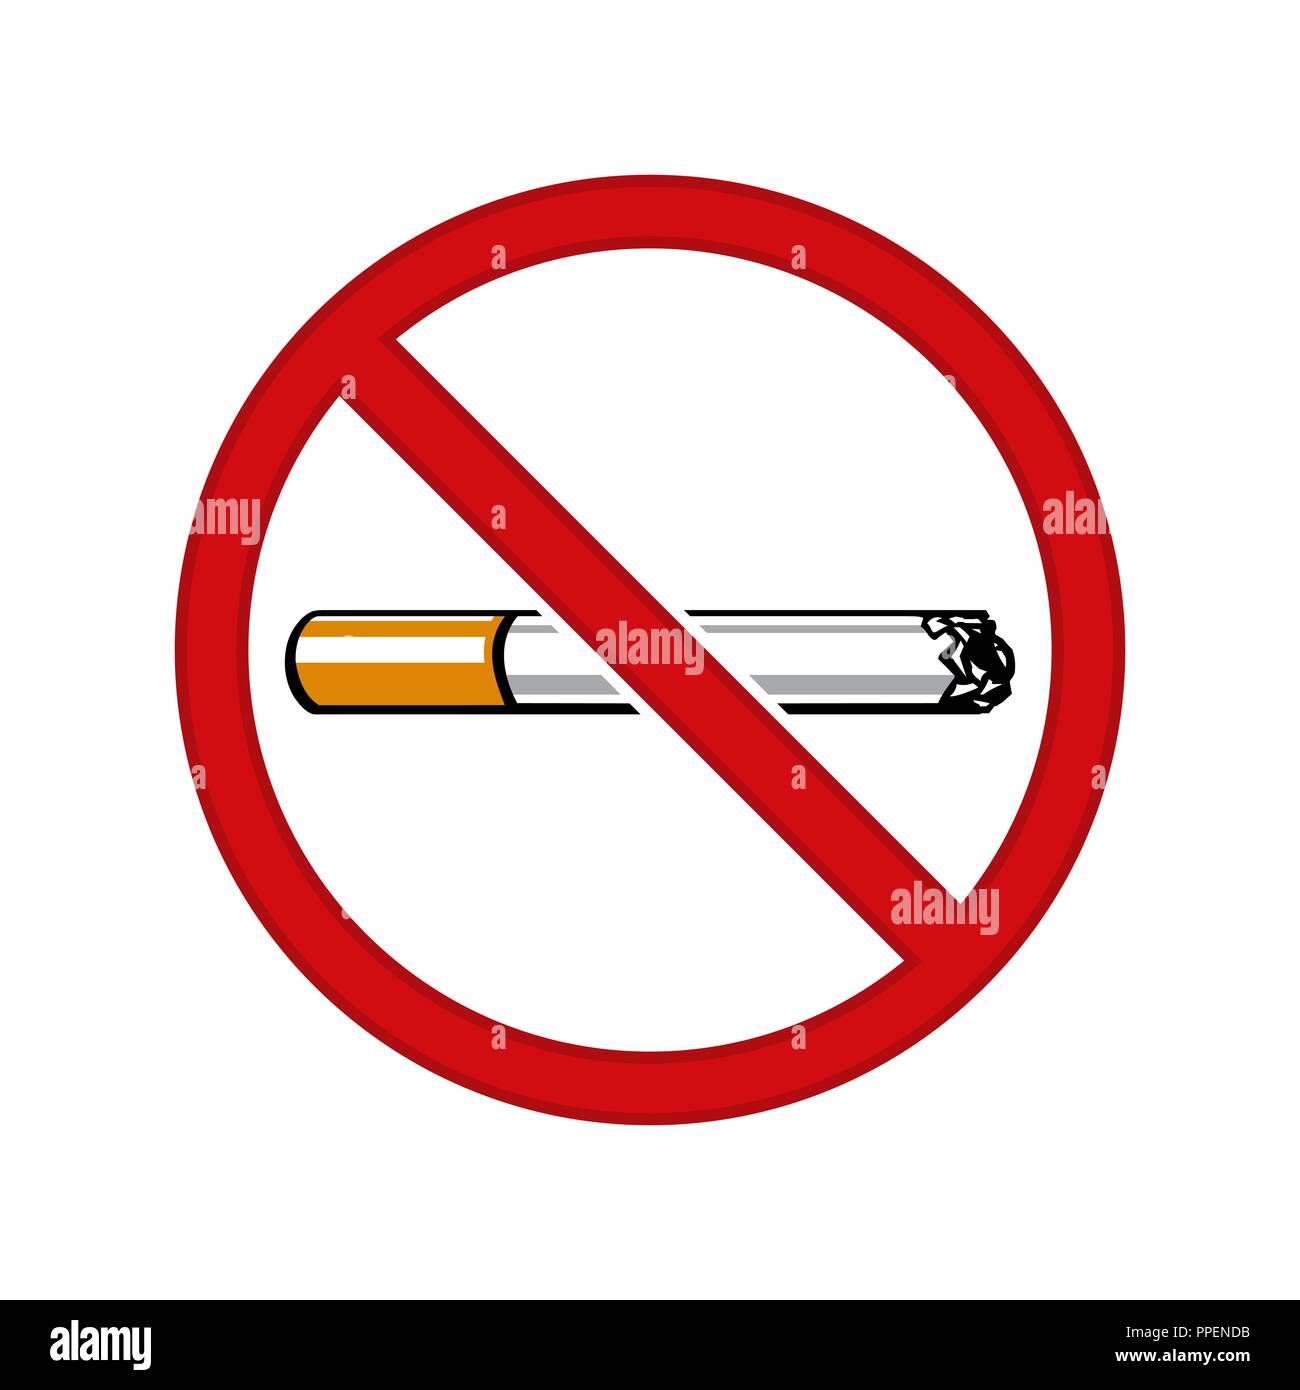 No Smoking sign vector illustration isolated on white background Stock Vector